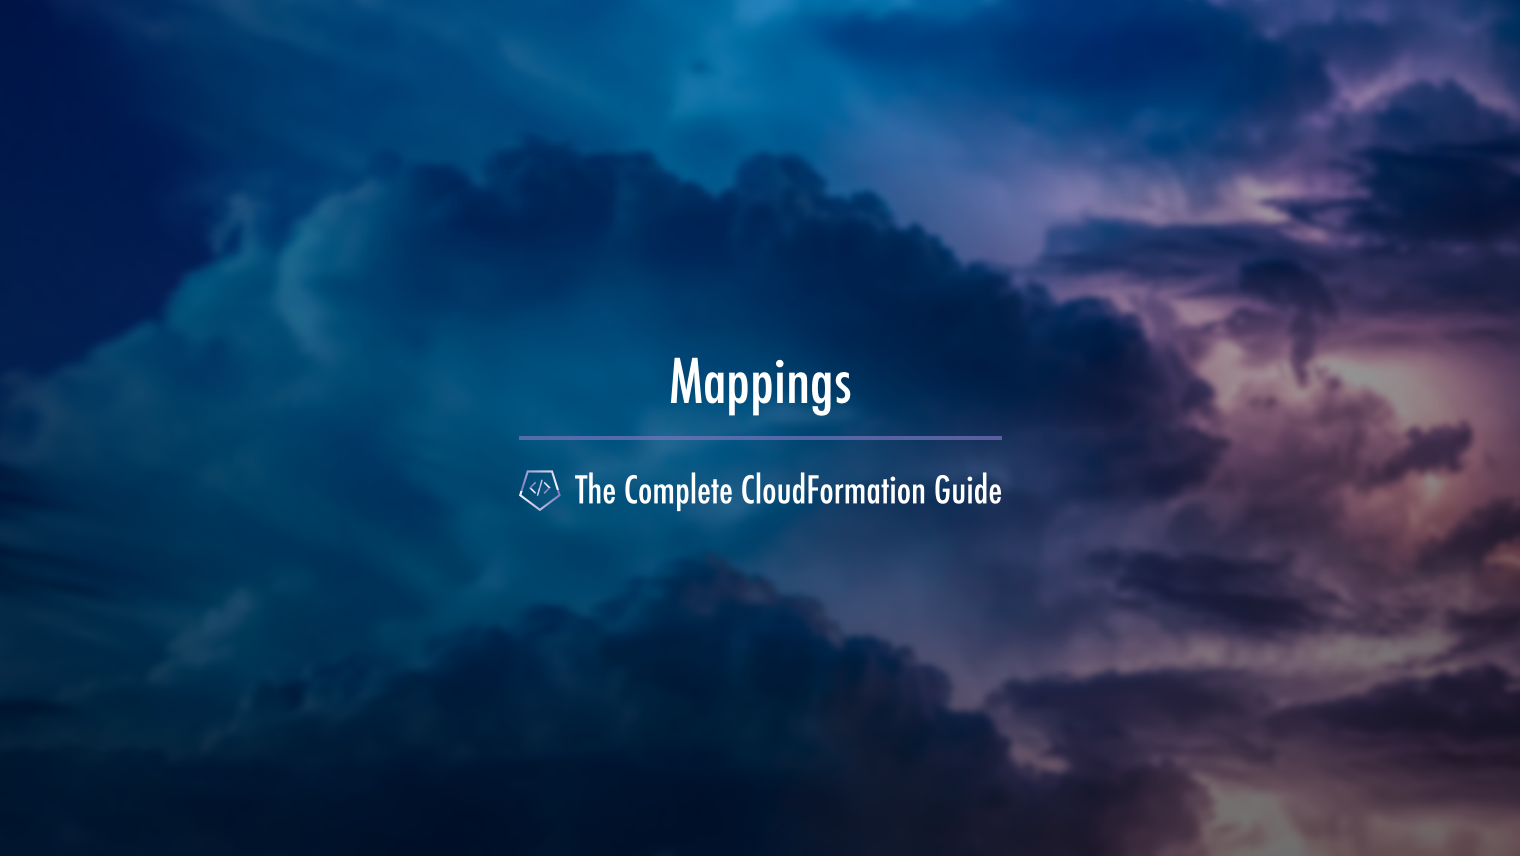 The Complete CloudFormation Guide Mappings